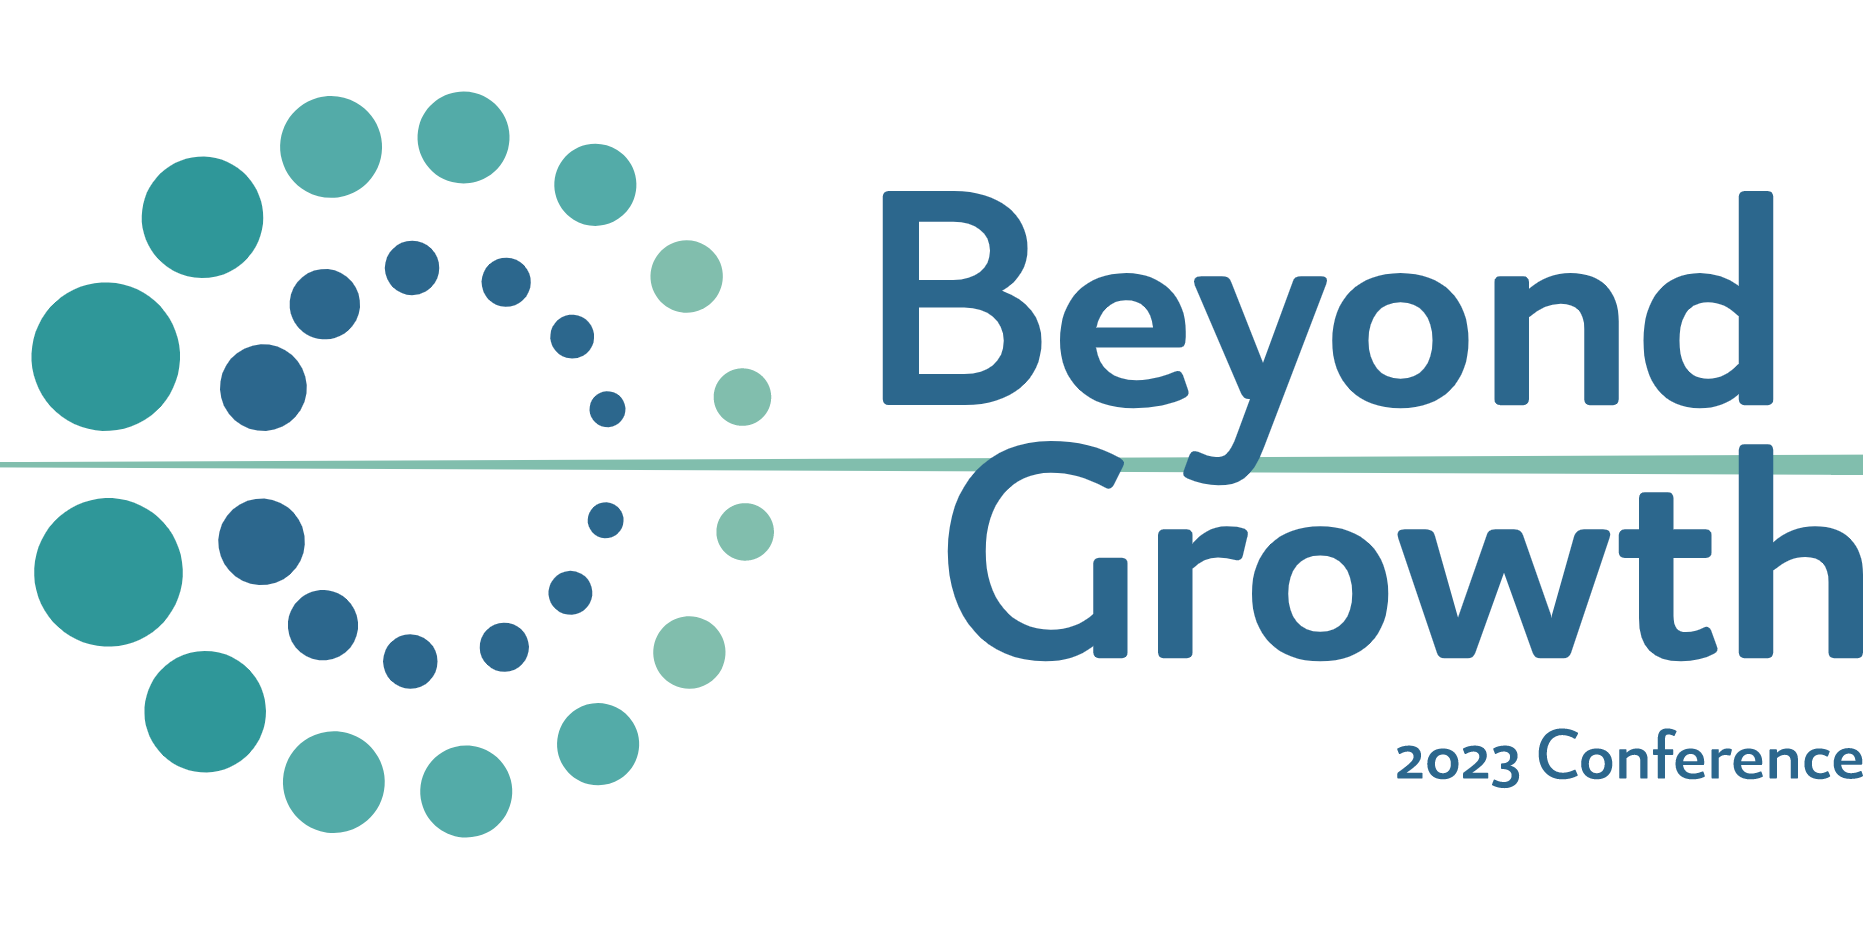 Beyond Growth 2023 Conference The International Society for